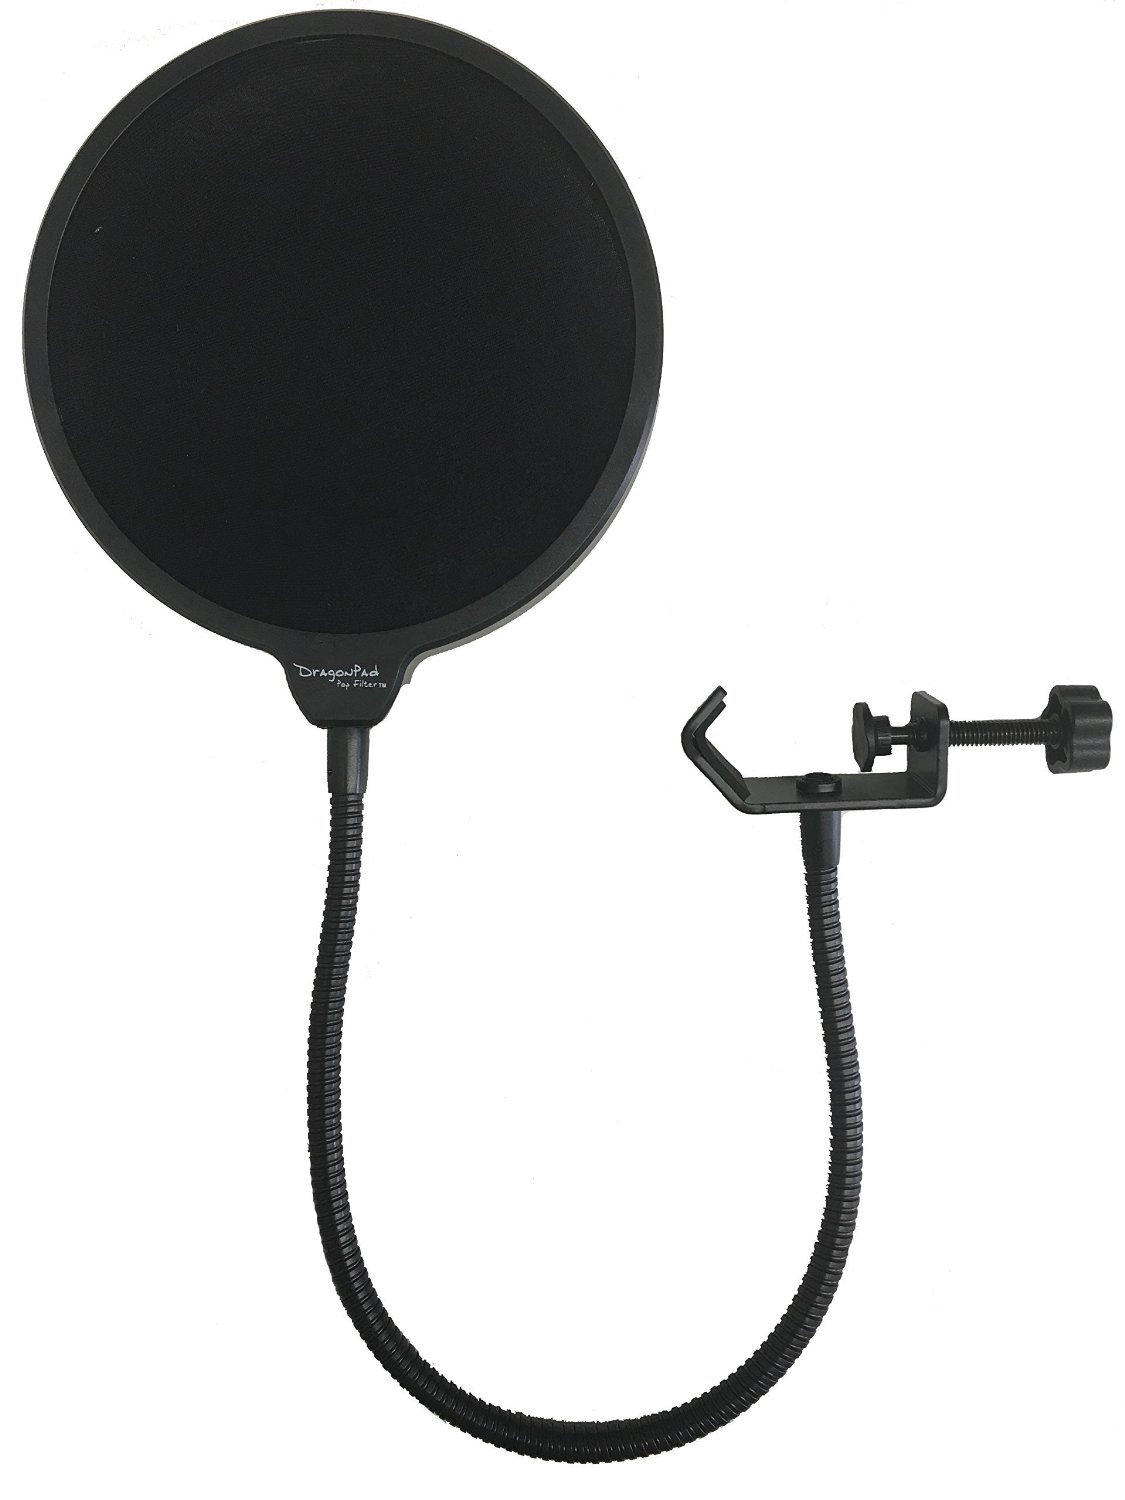 How to Record Vocals: Pop Filter